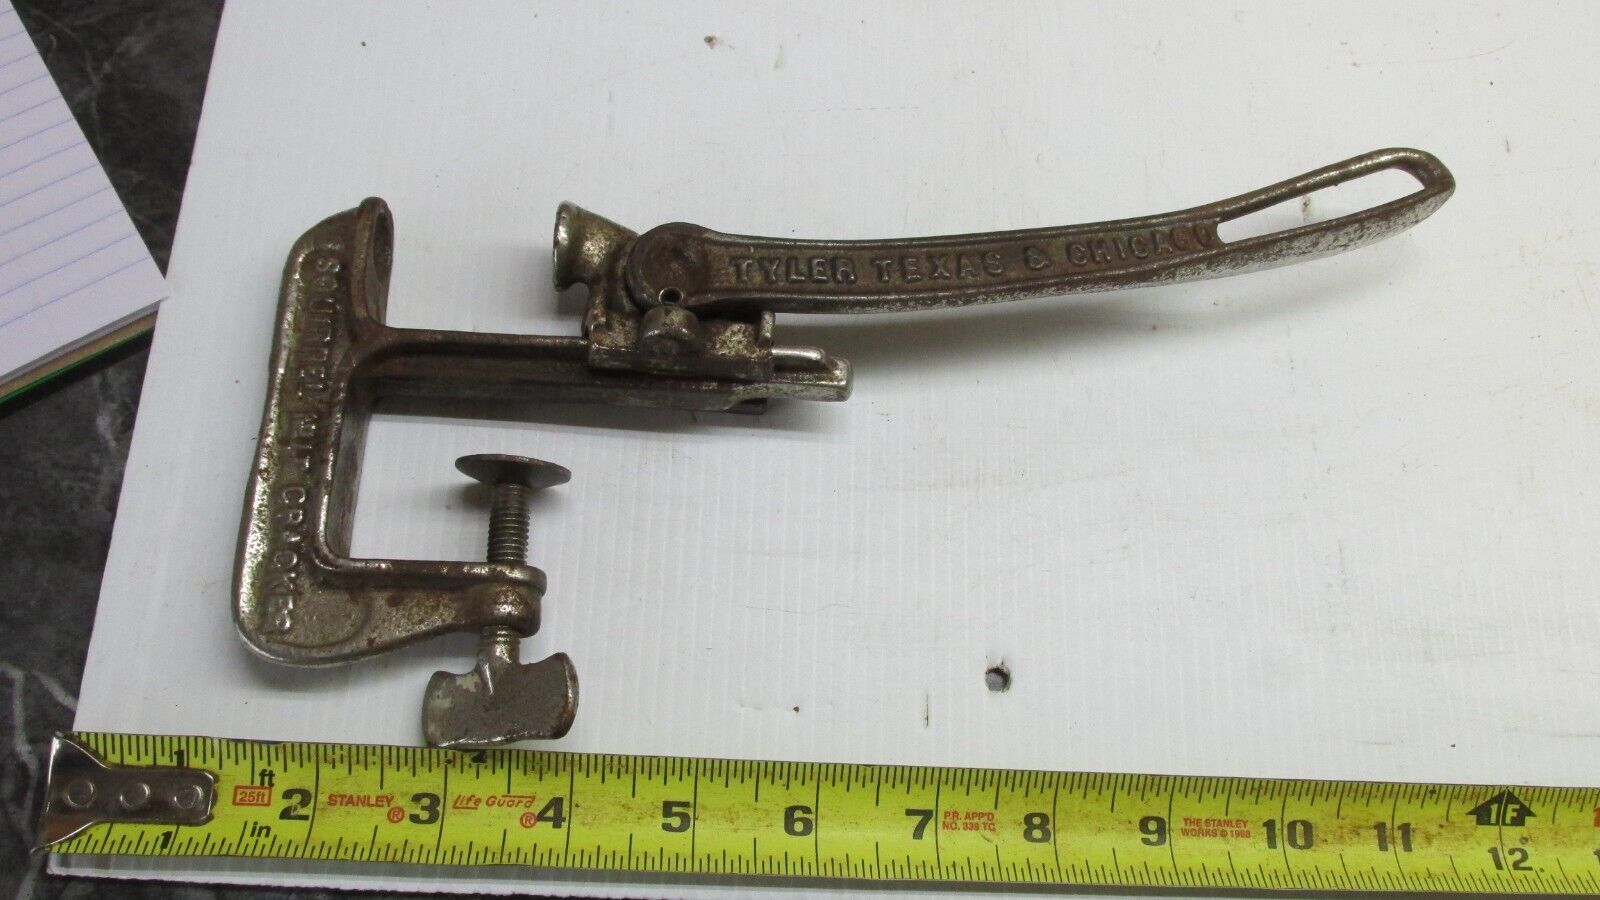 Old  Squirrel Nut Cracker  Tool  Tyler Texas & Chicago Patd 1913